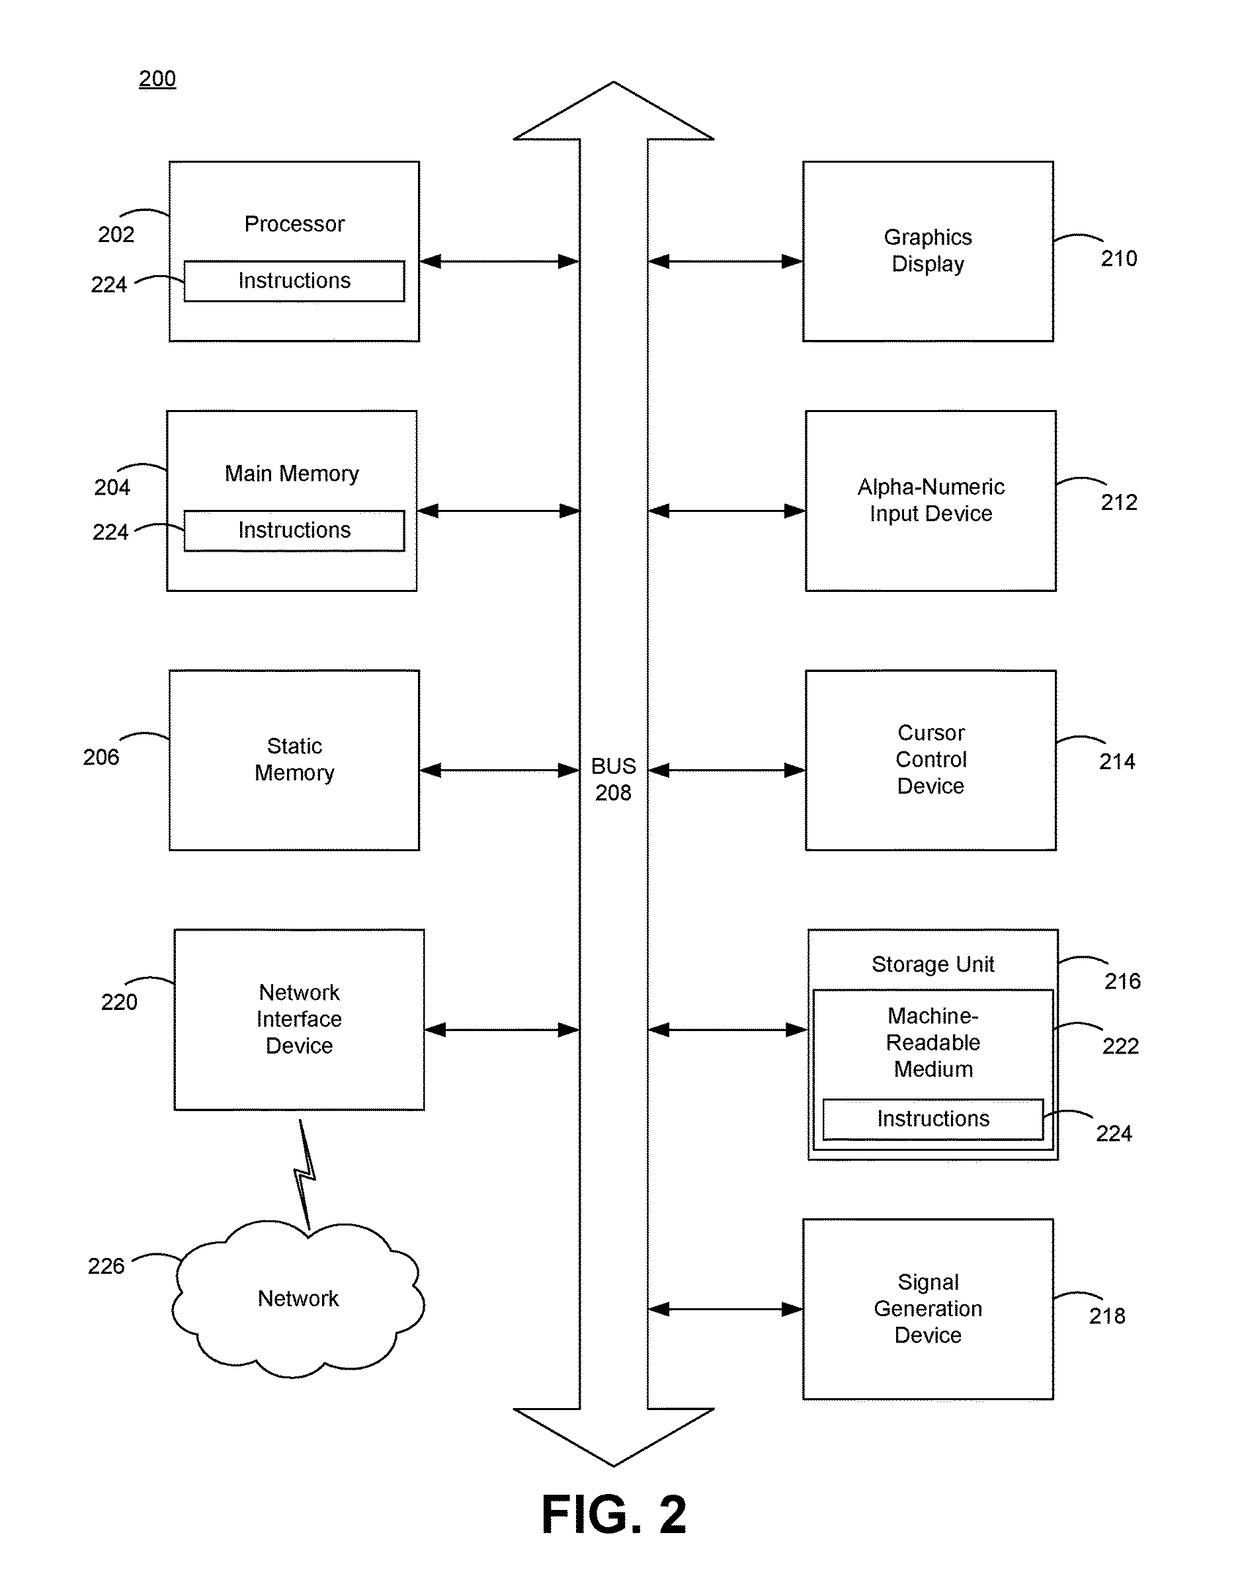 Scheme and Design Markup Language for Interoperability of Electronic Design Application Tool and Browser